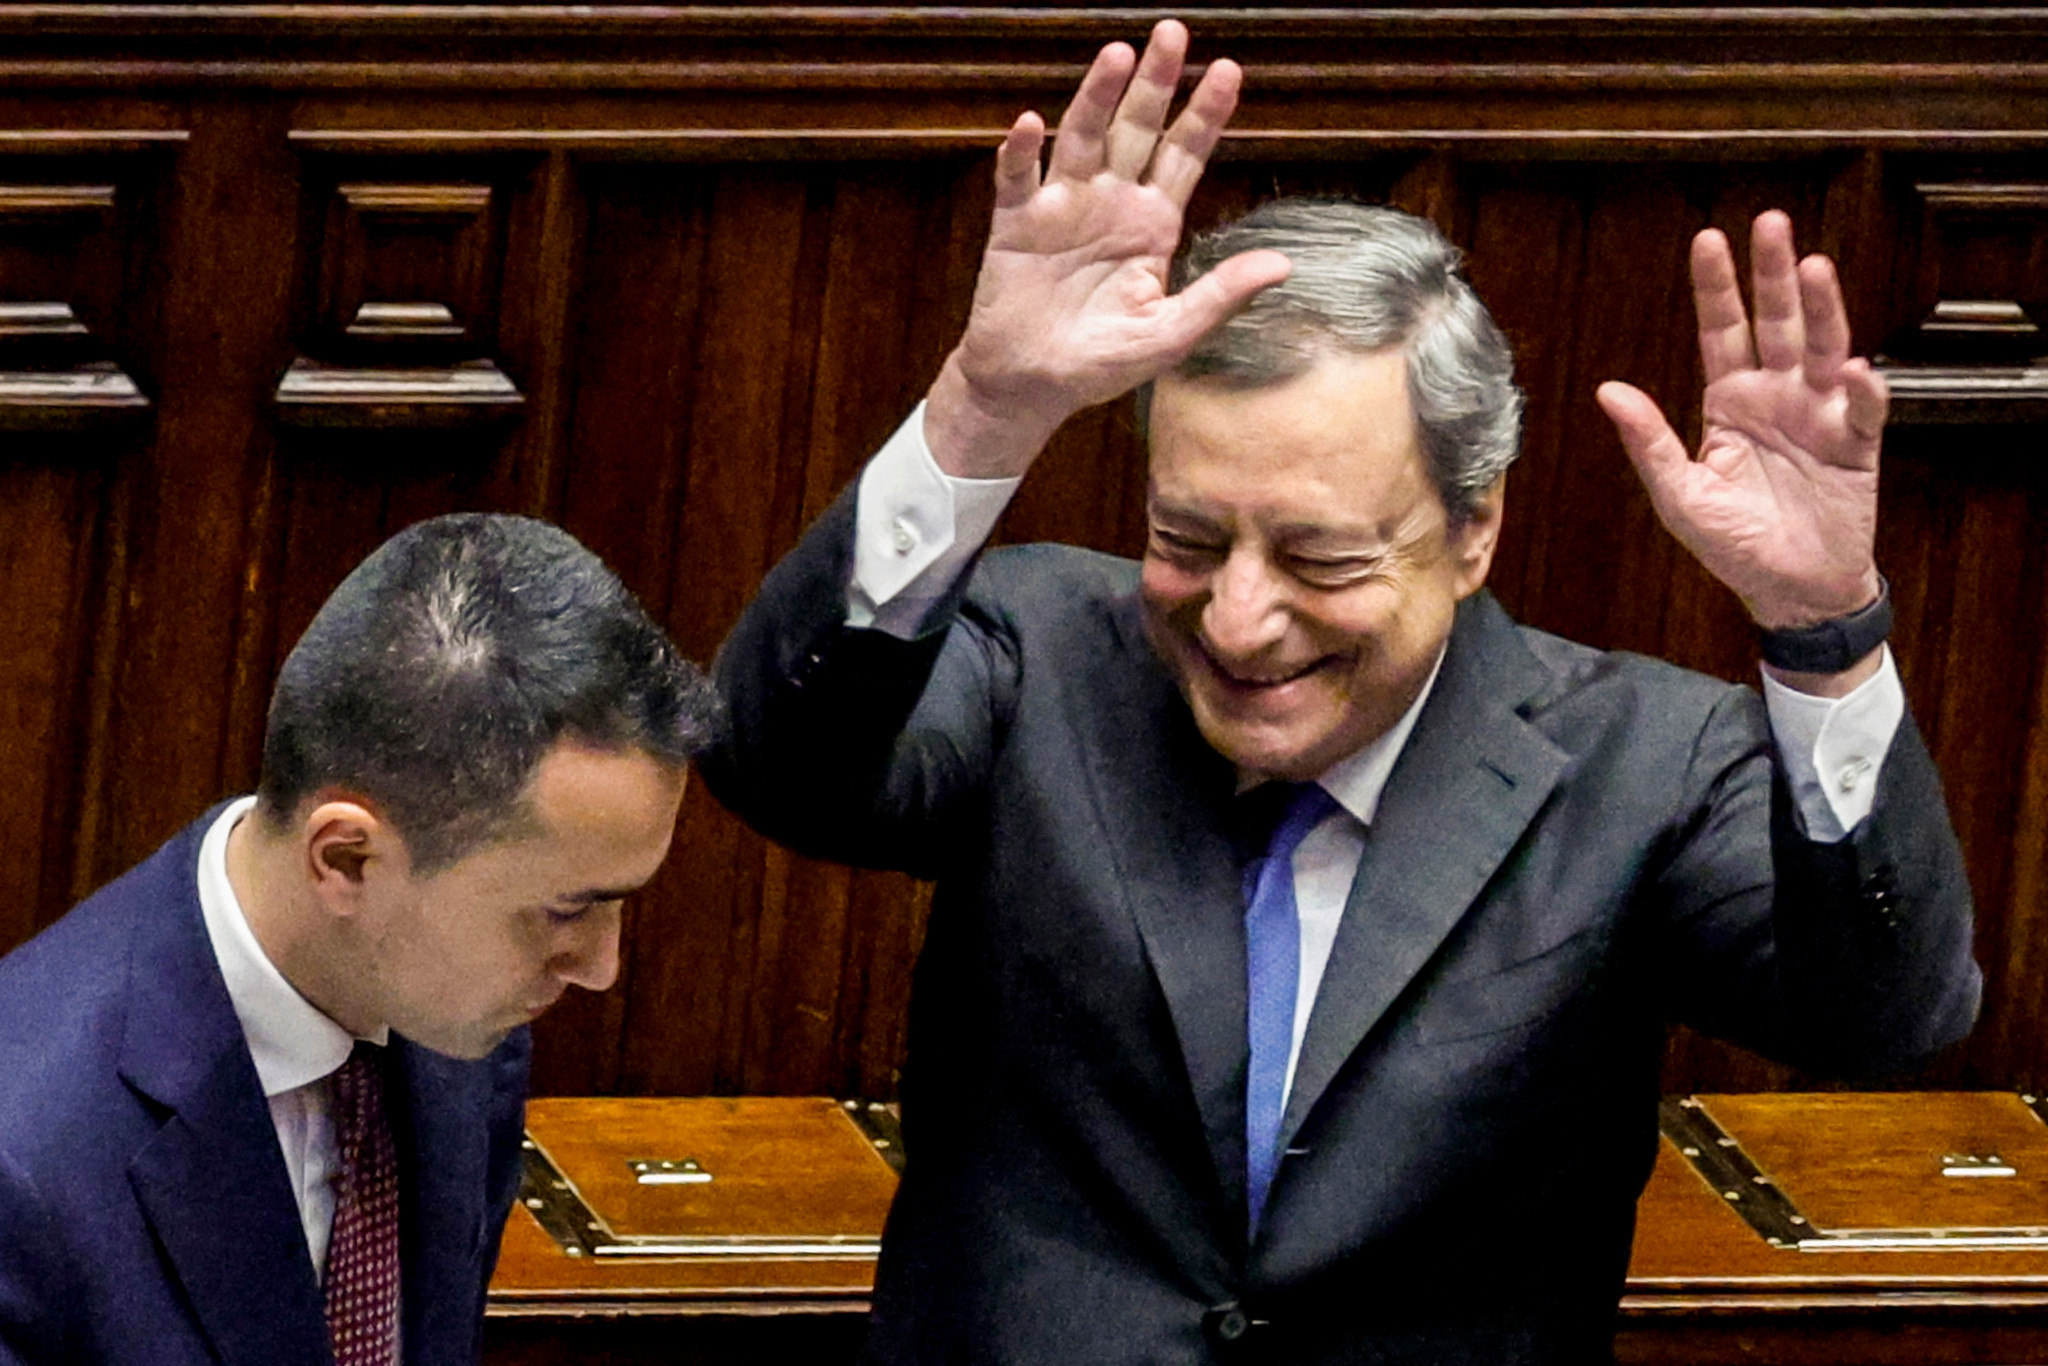 Mario Draghi has resigned as Prime Minister of Italy, leaving the country facing more political turmoil ©Getty Images